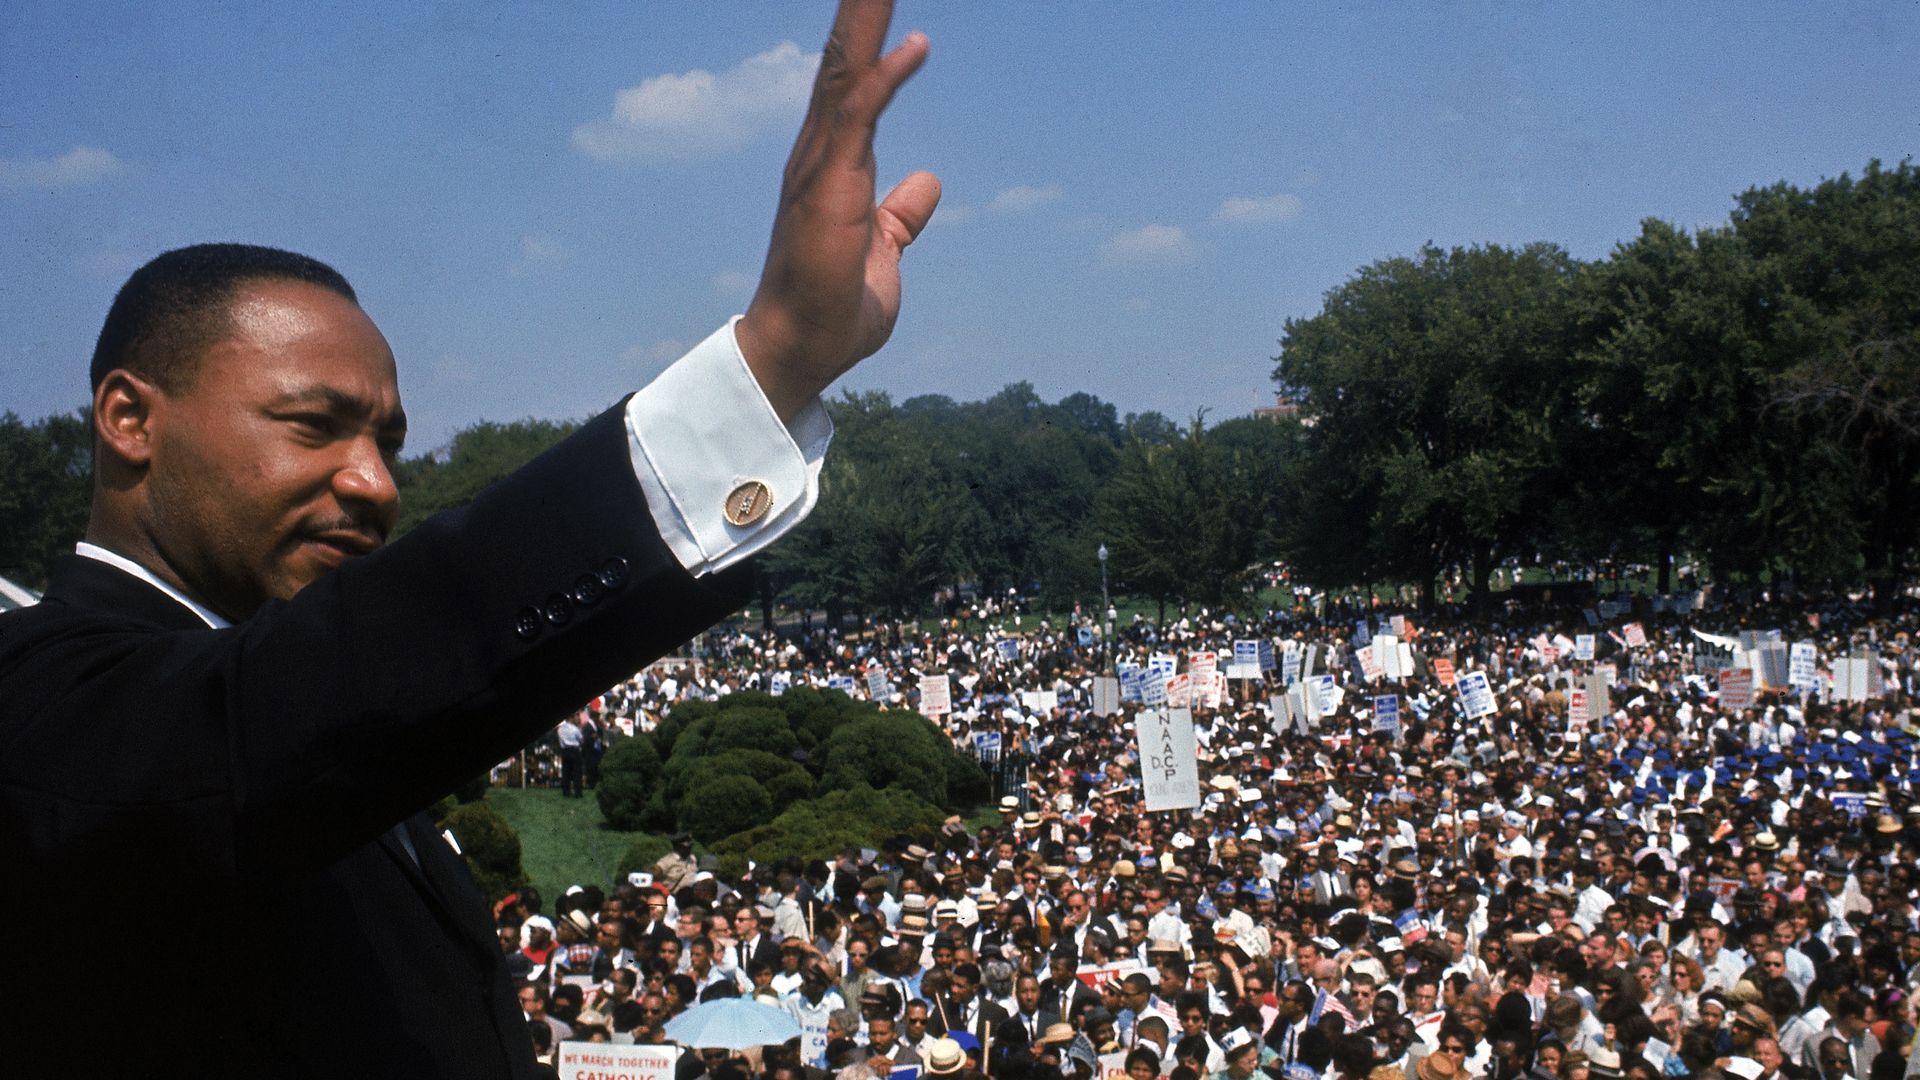 Martin Luther King, Jr. waves to a crowd